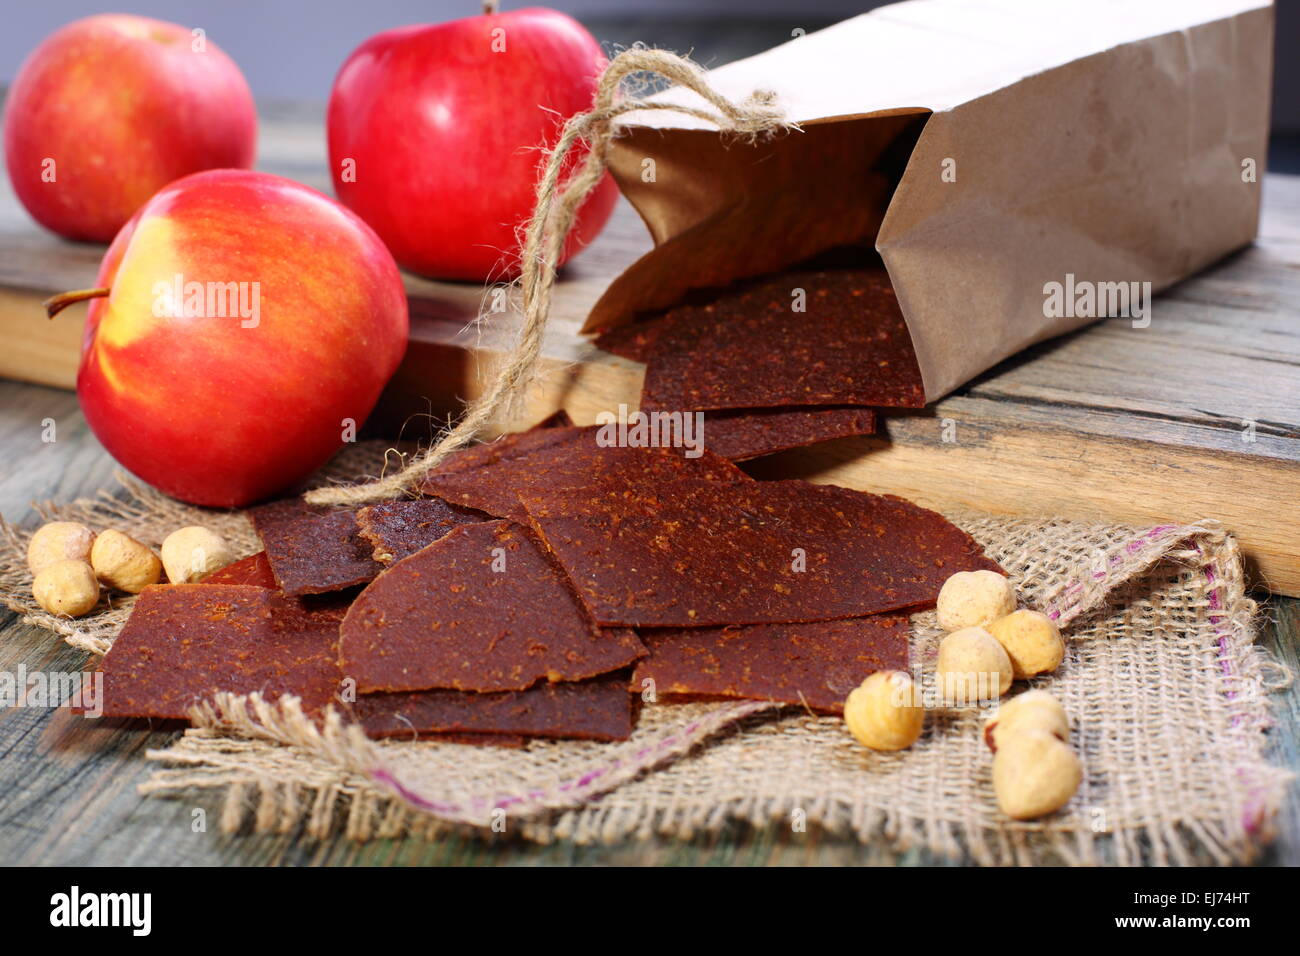 Apple fruit and paste. Stock Photo